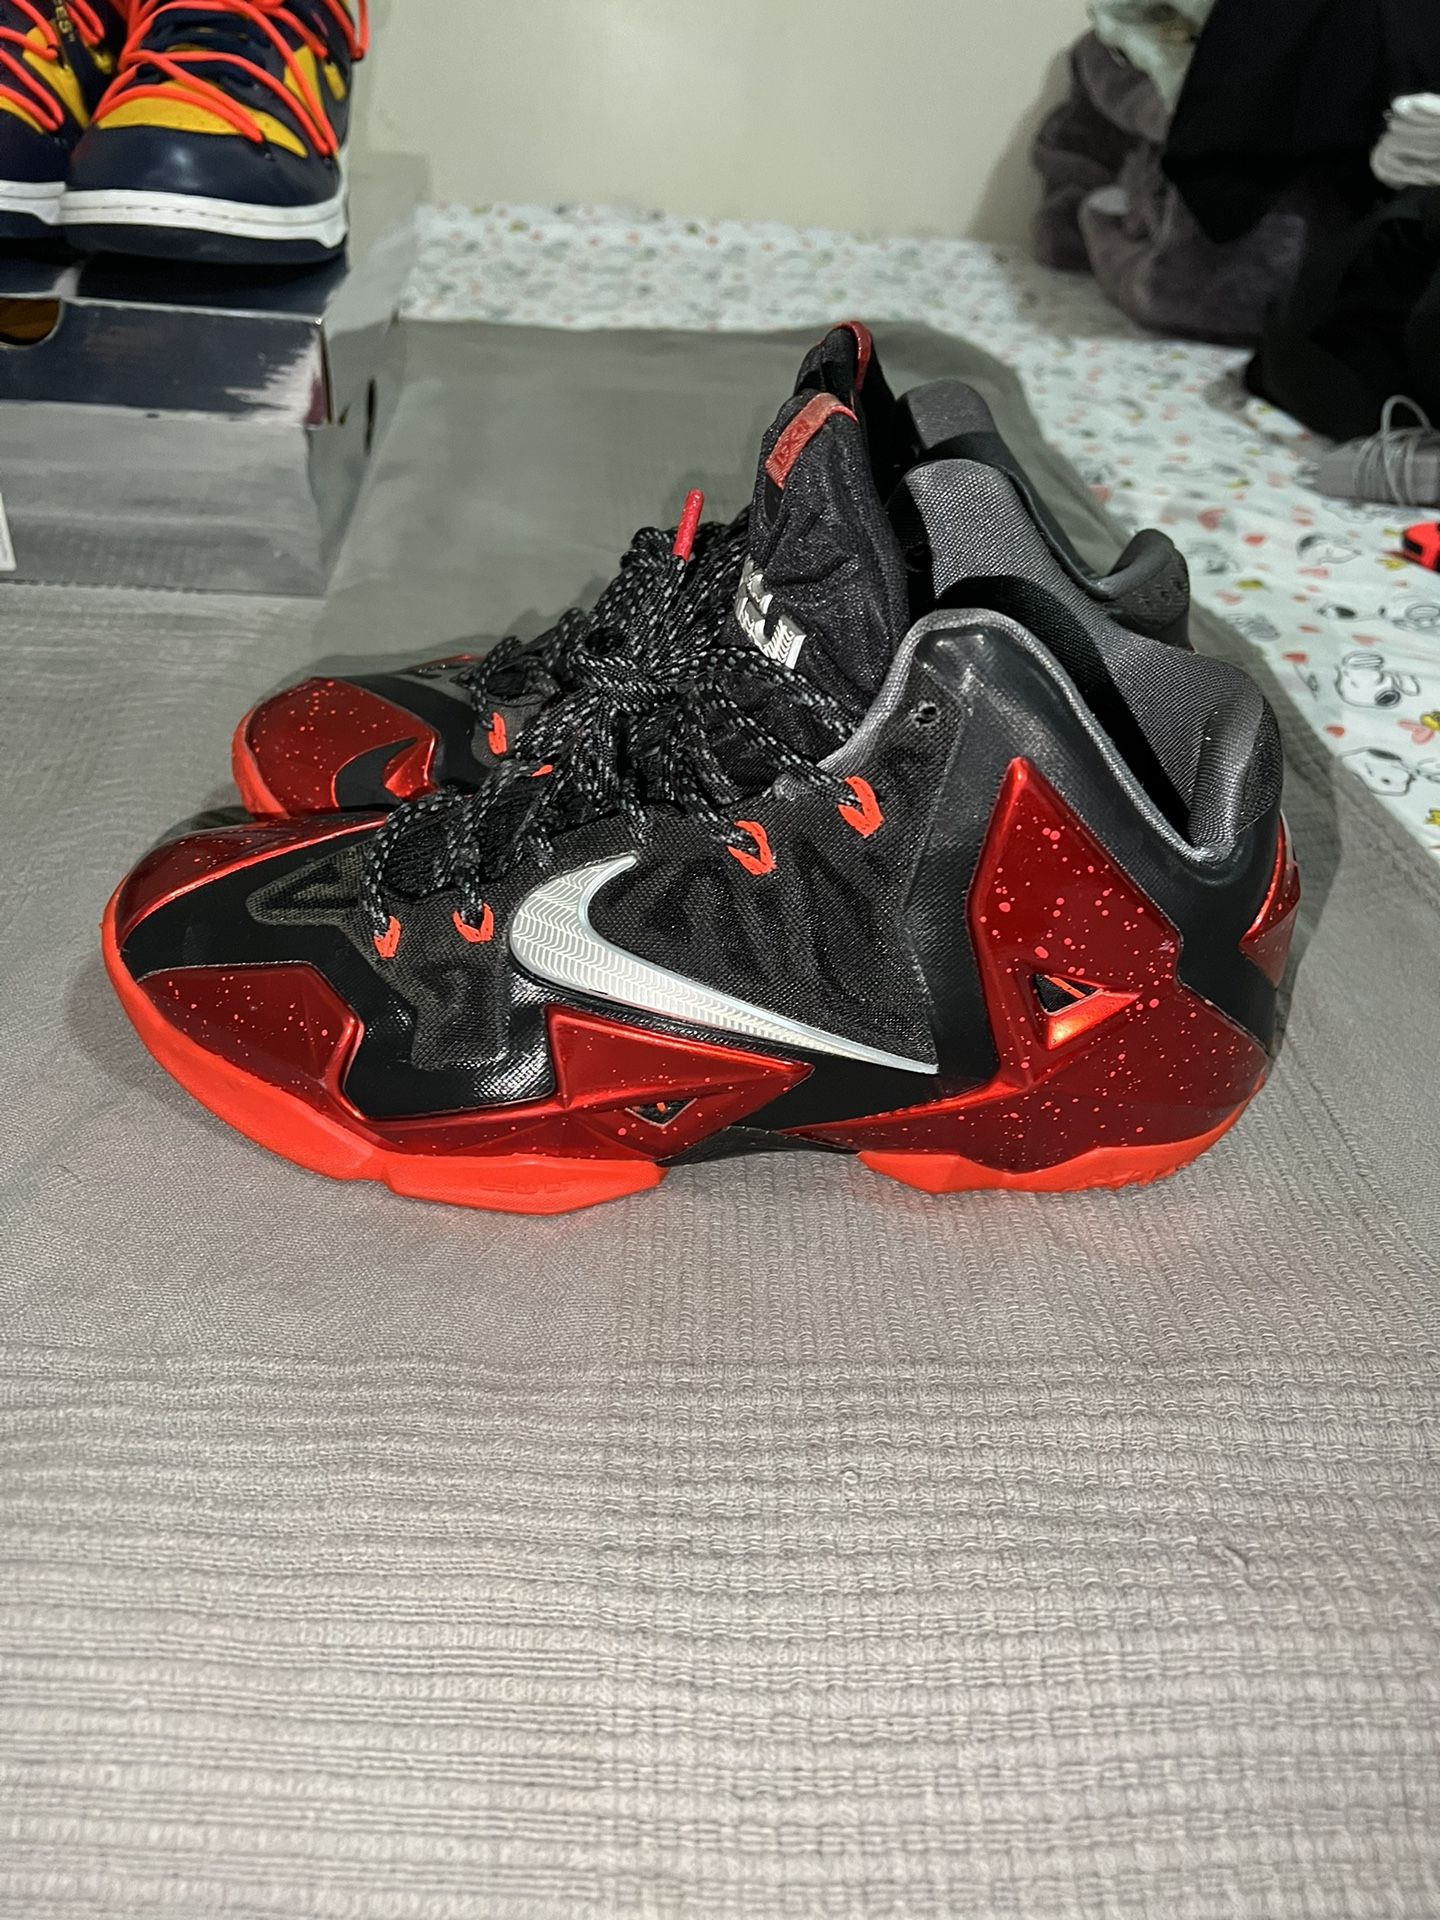 Lebron 11 9 for Sale Bronx, NY - OfferUp